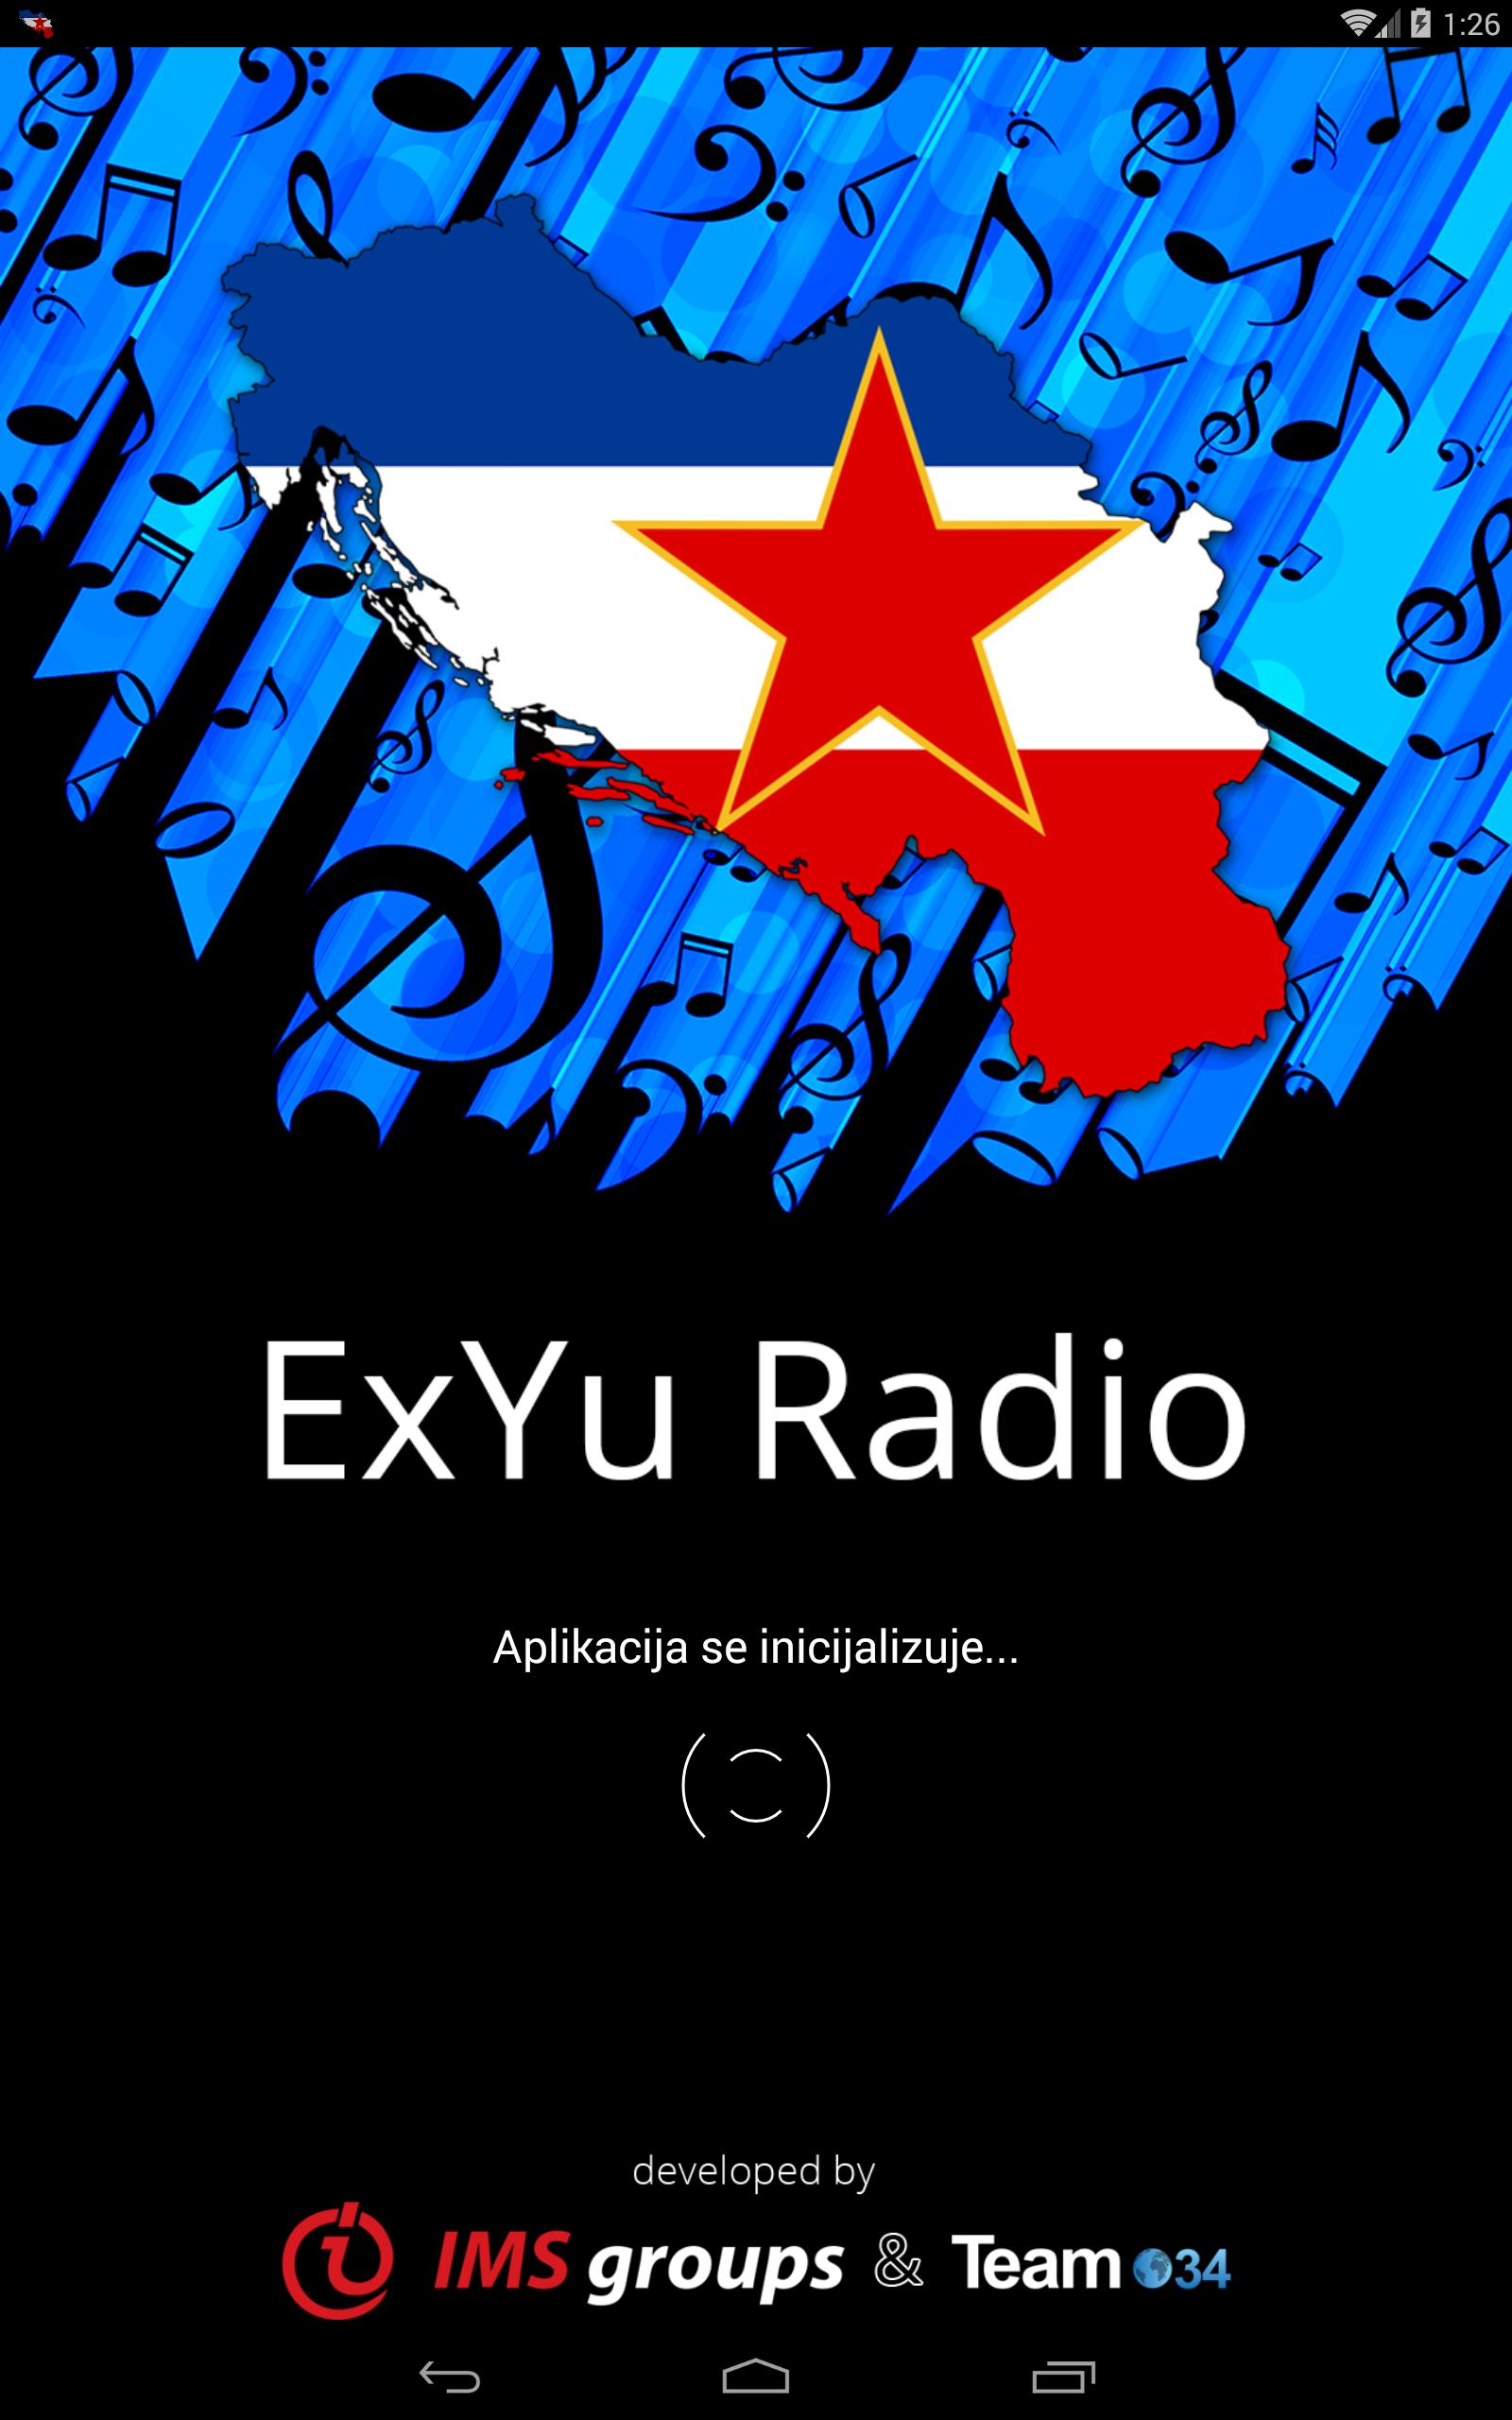 ExYu Radio for Android - APK Download